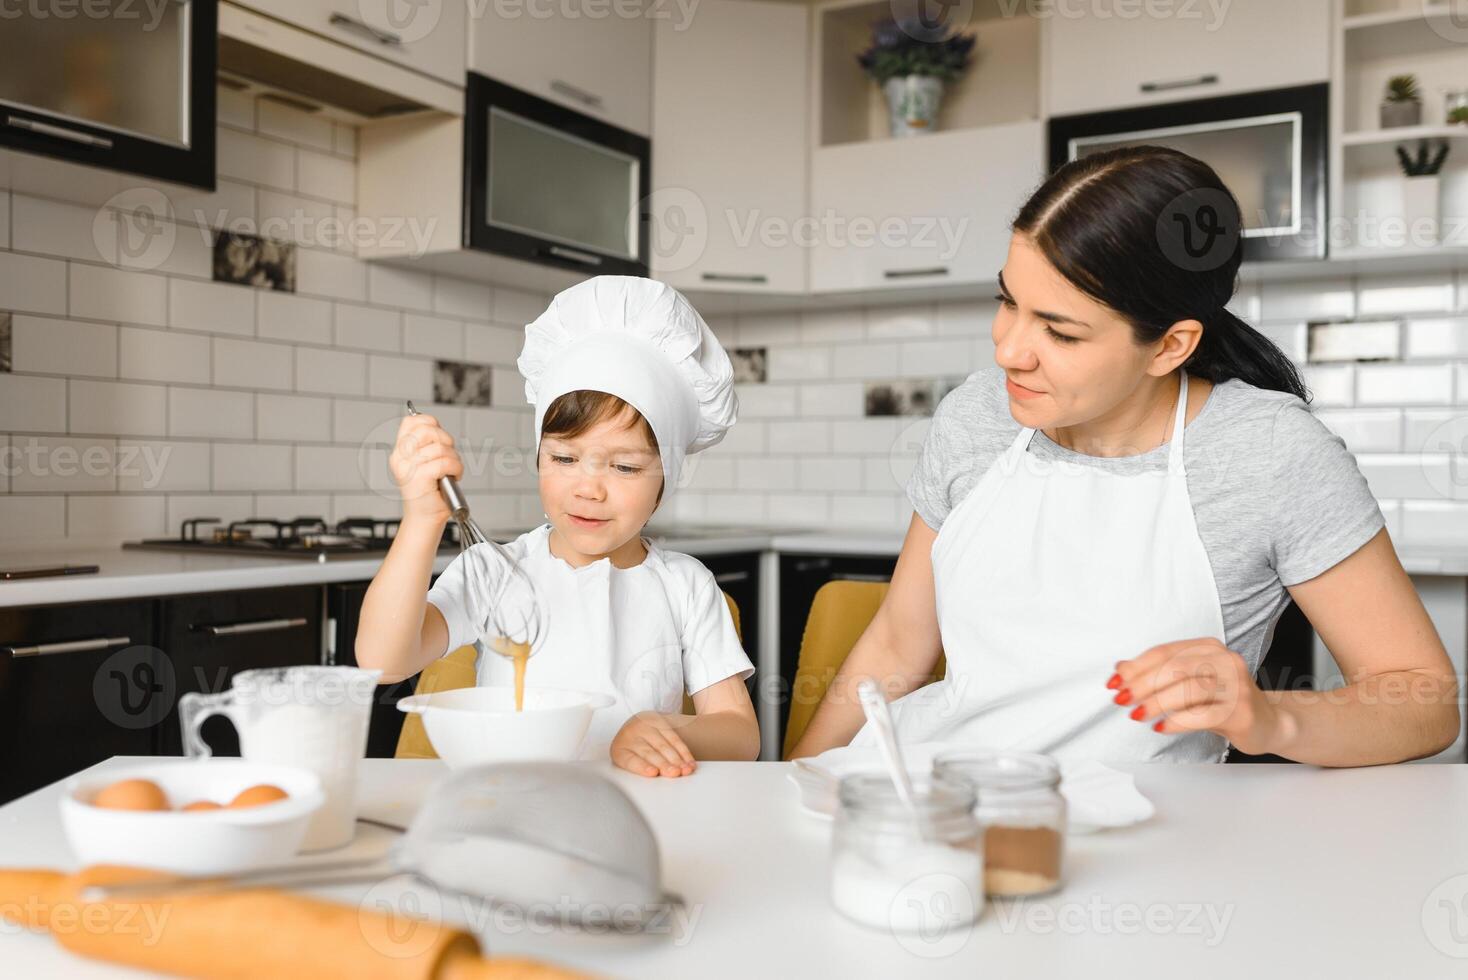 A young and beautiful mother is preparing food at home in the kitchen, along with her little son photo